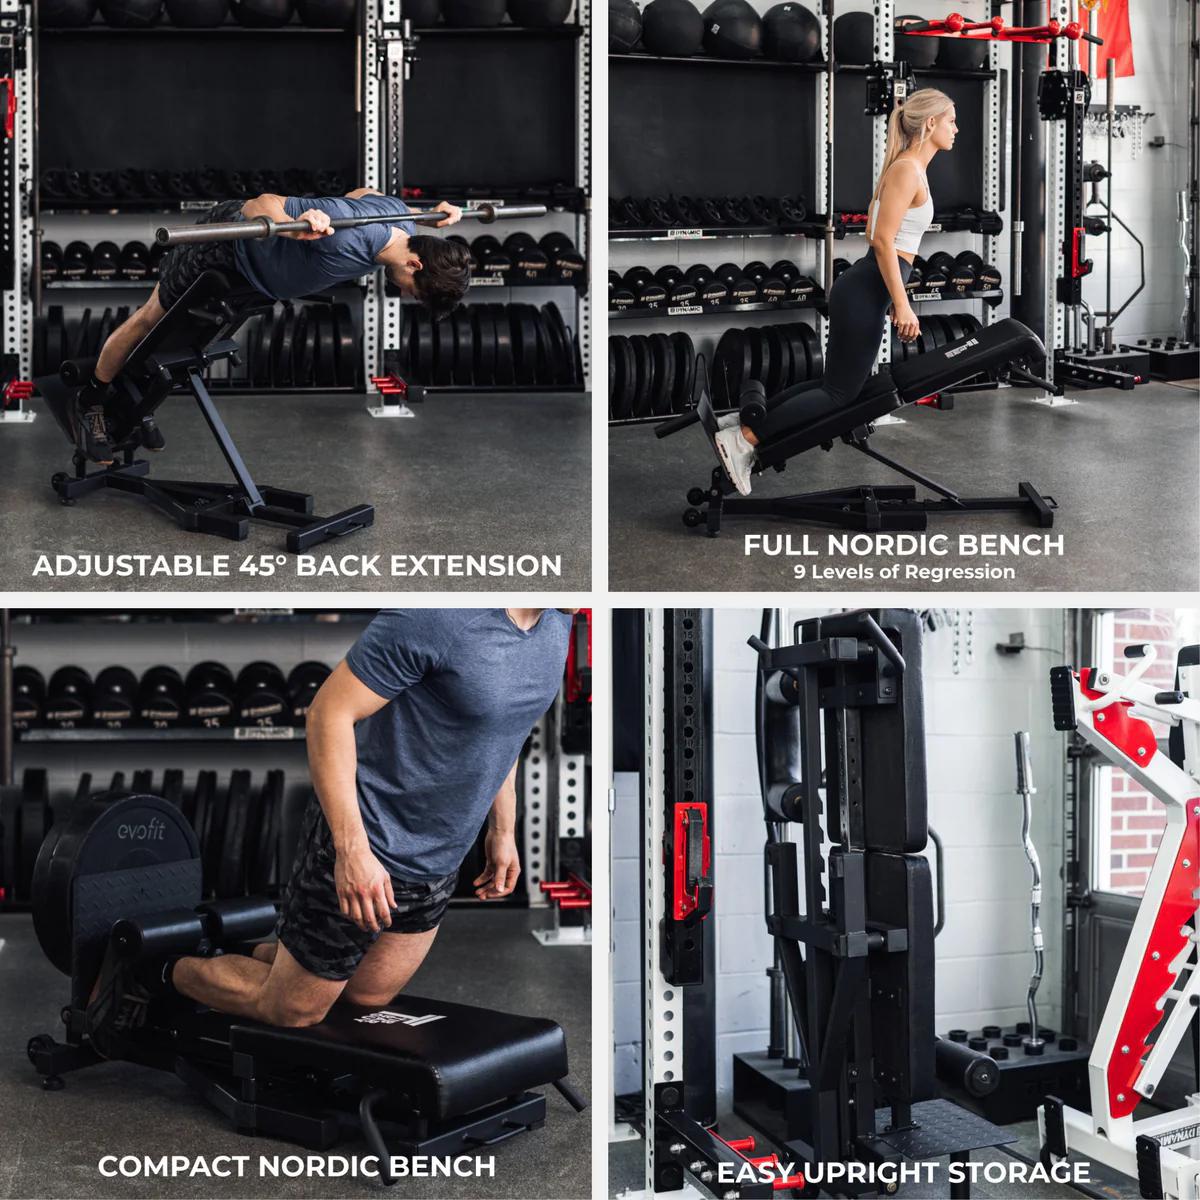 The Nordic Back Extension Machine - by The TIB Bar Guy